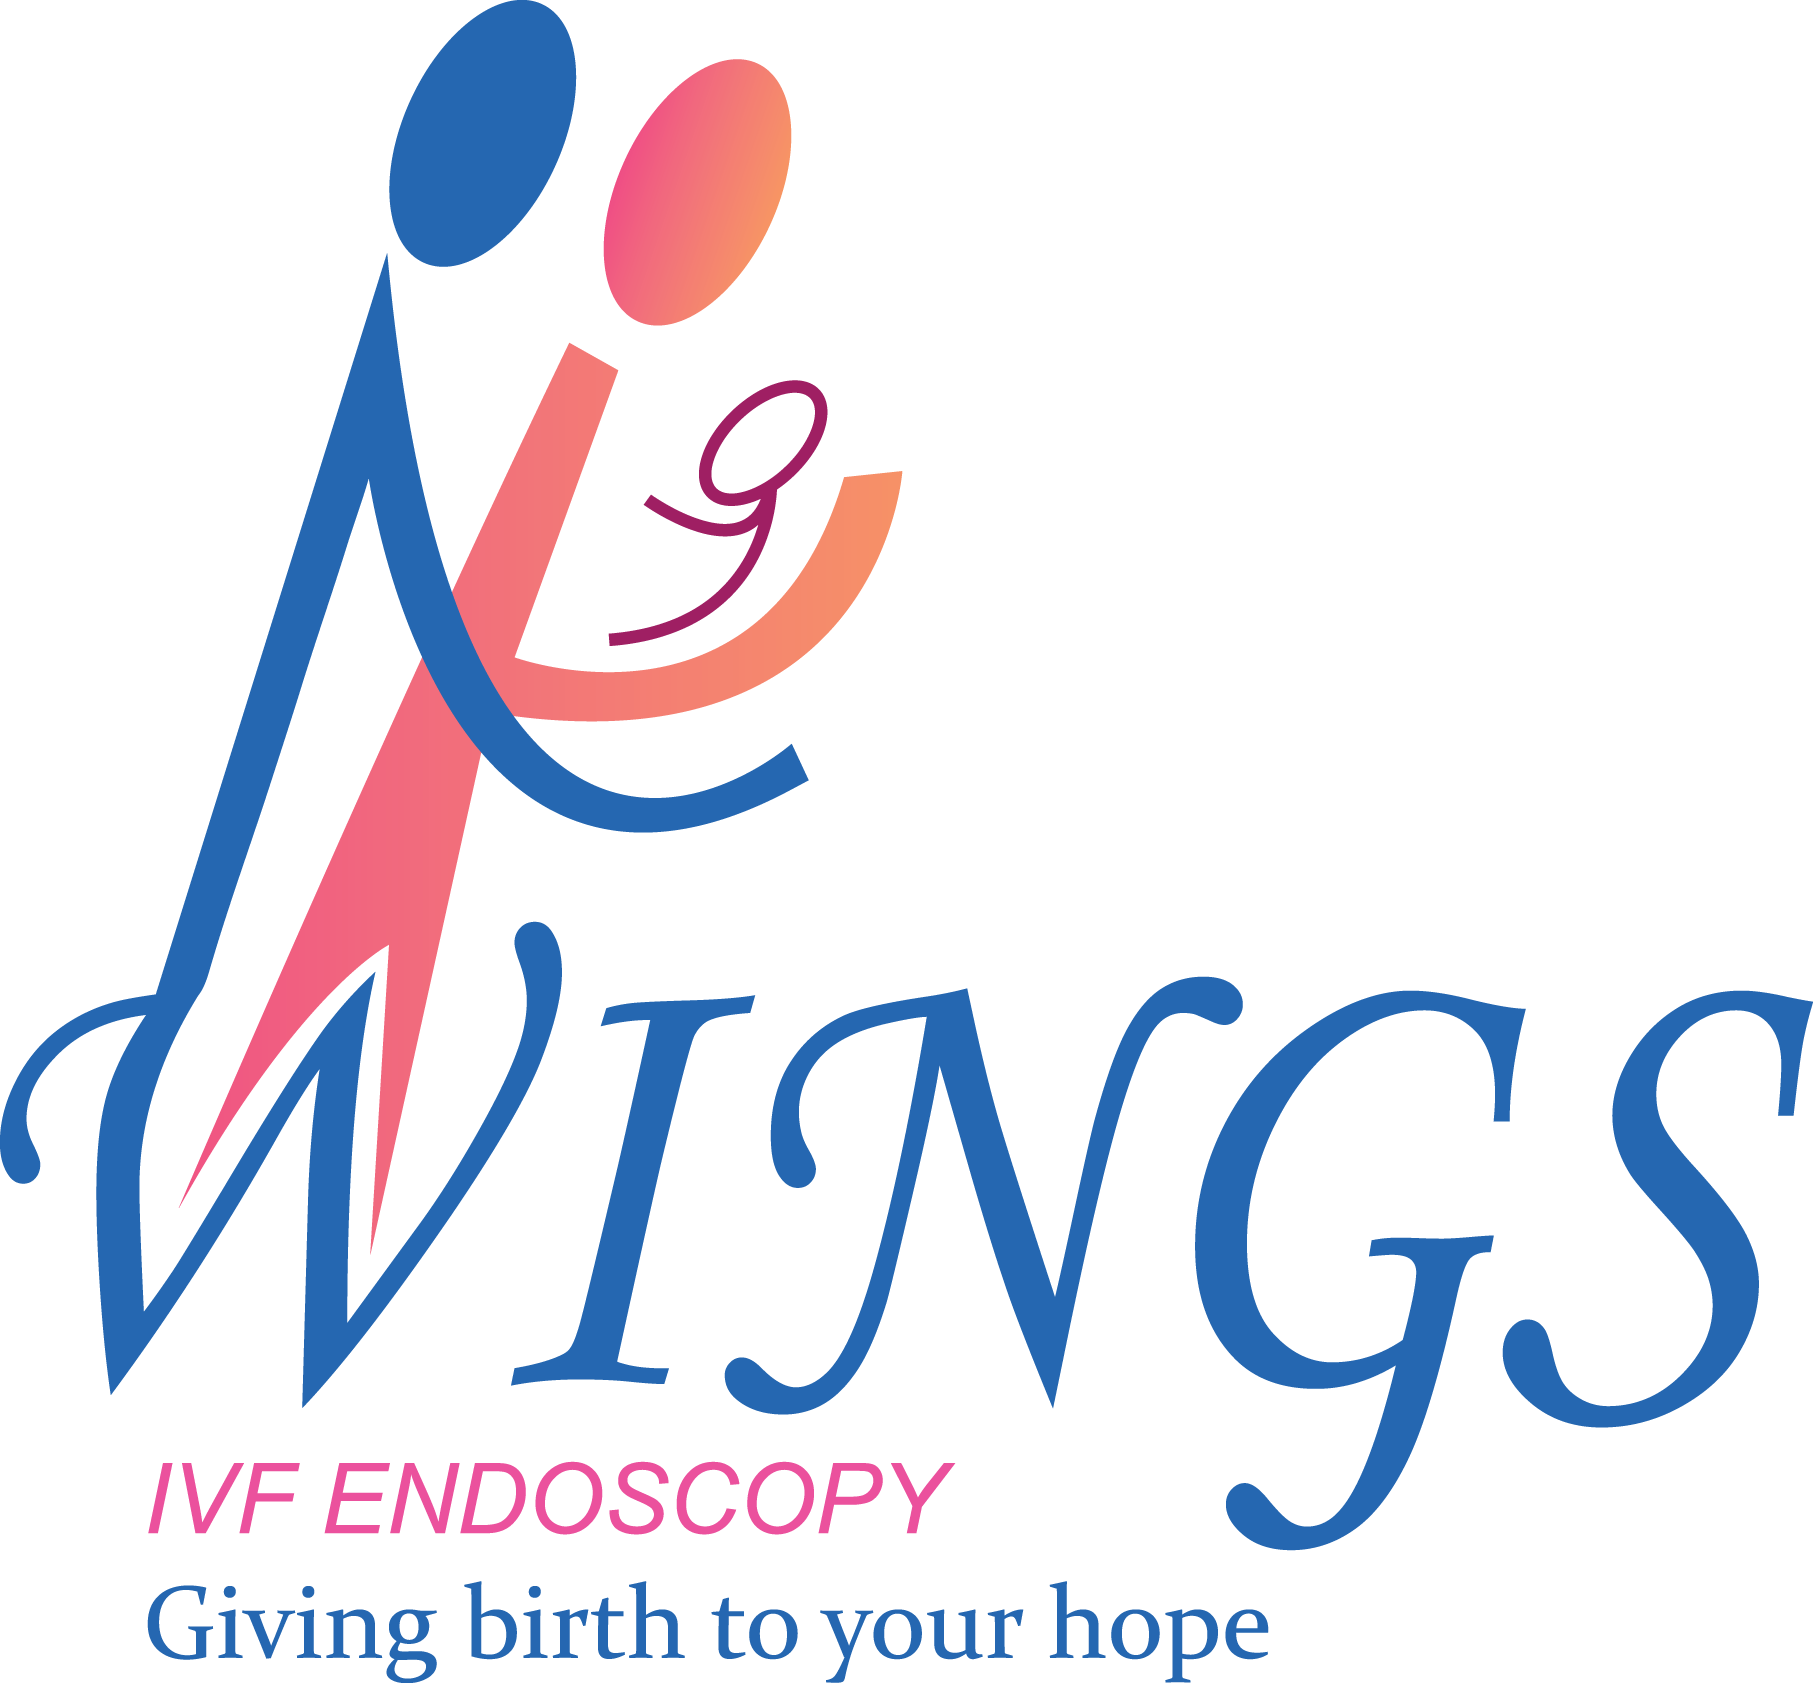 Wings Hospitals|Healthcare|Medical Services